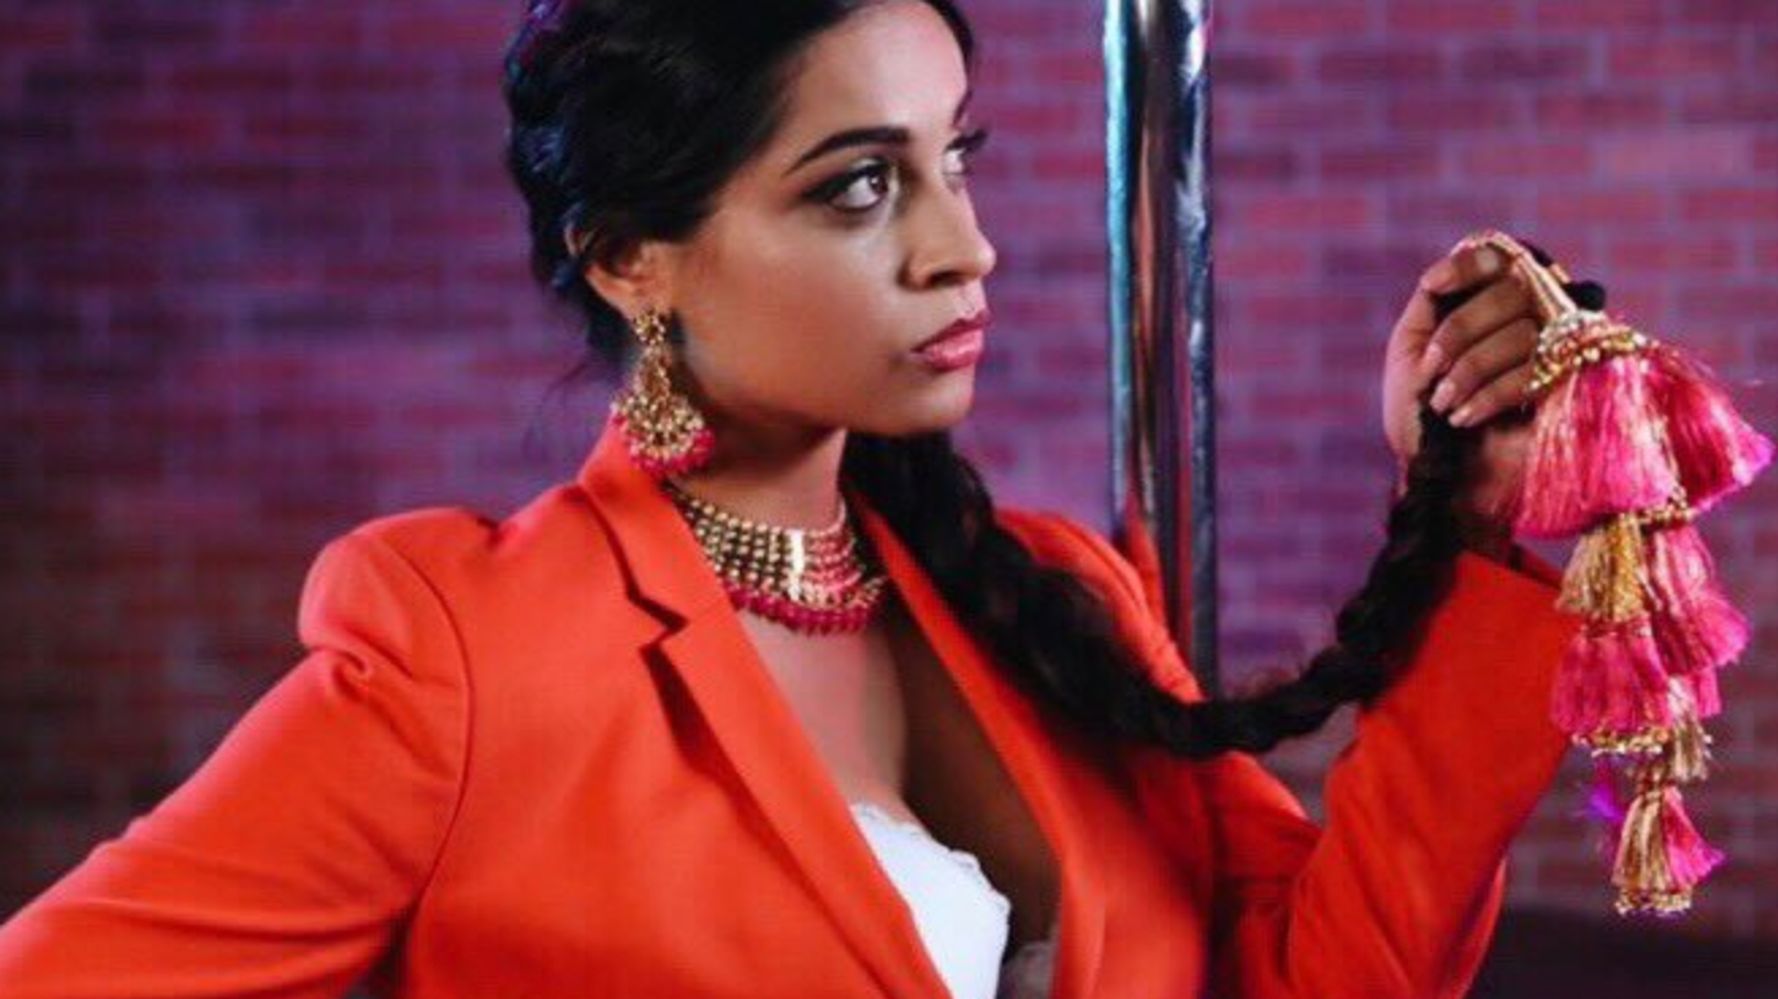 Youtube Star Lilly Singh Just Dropped A Video Of Remade Bollywood Songs